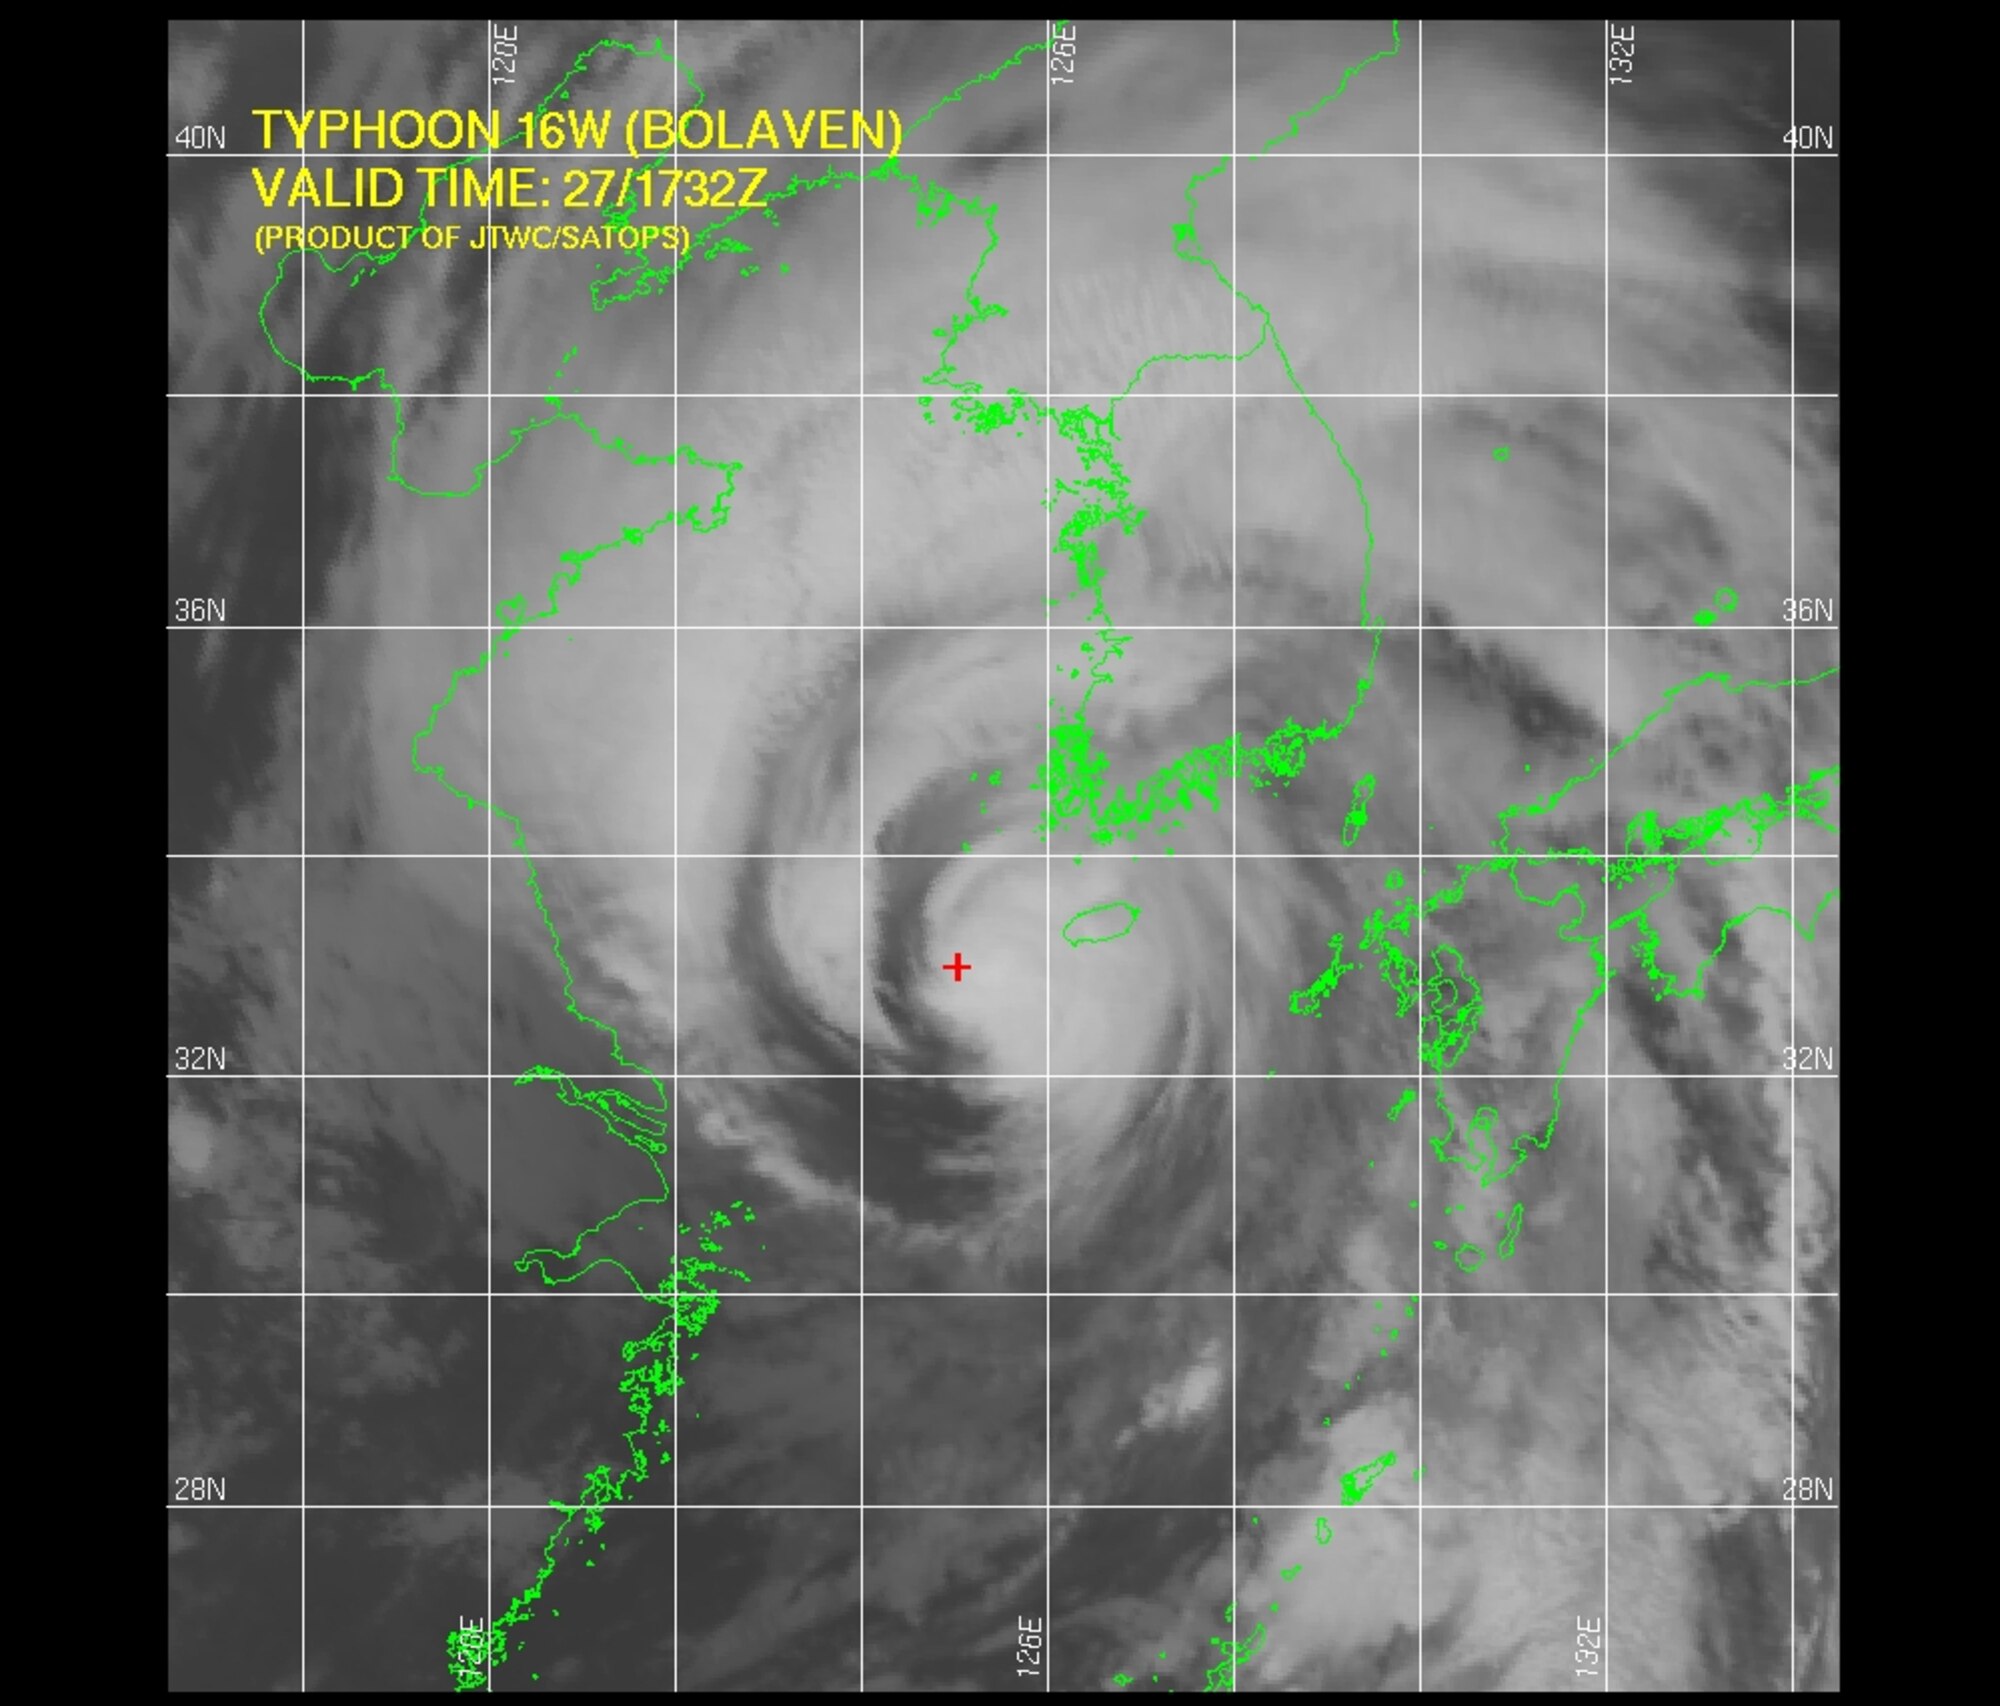 Typhoon Bolaven (Satellite image courtesy of the Joint Typhoon Weather Center)